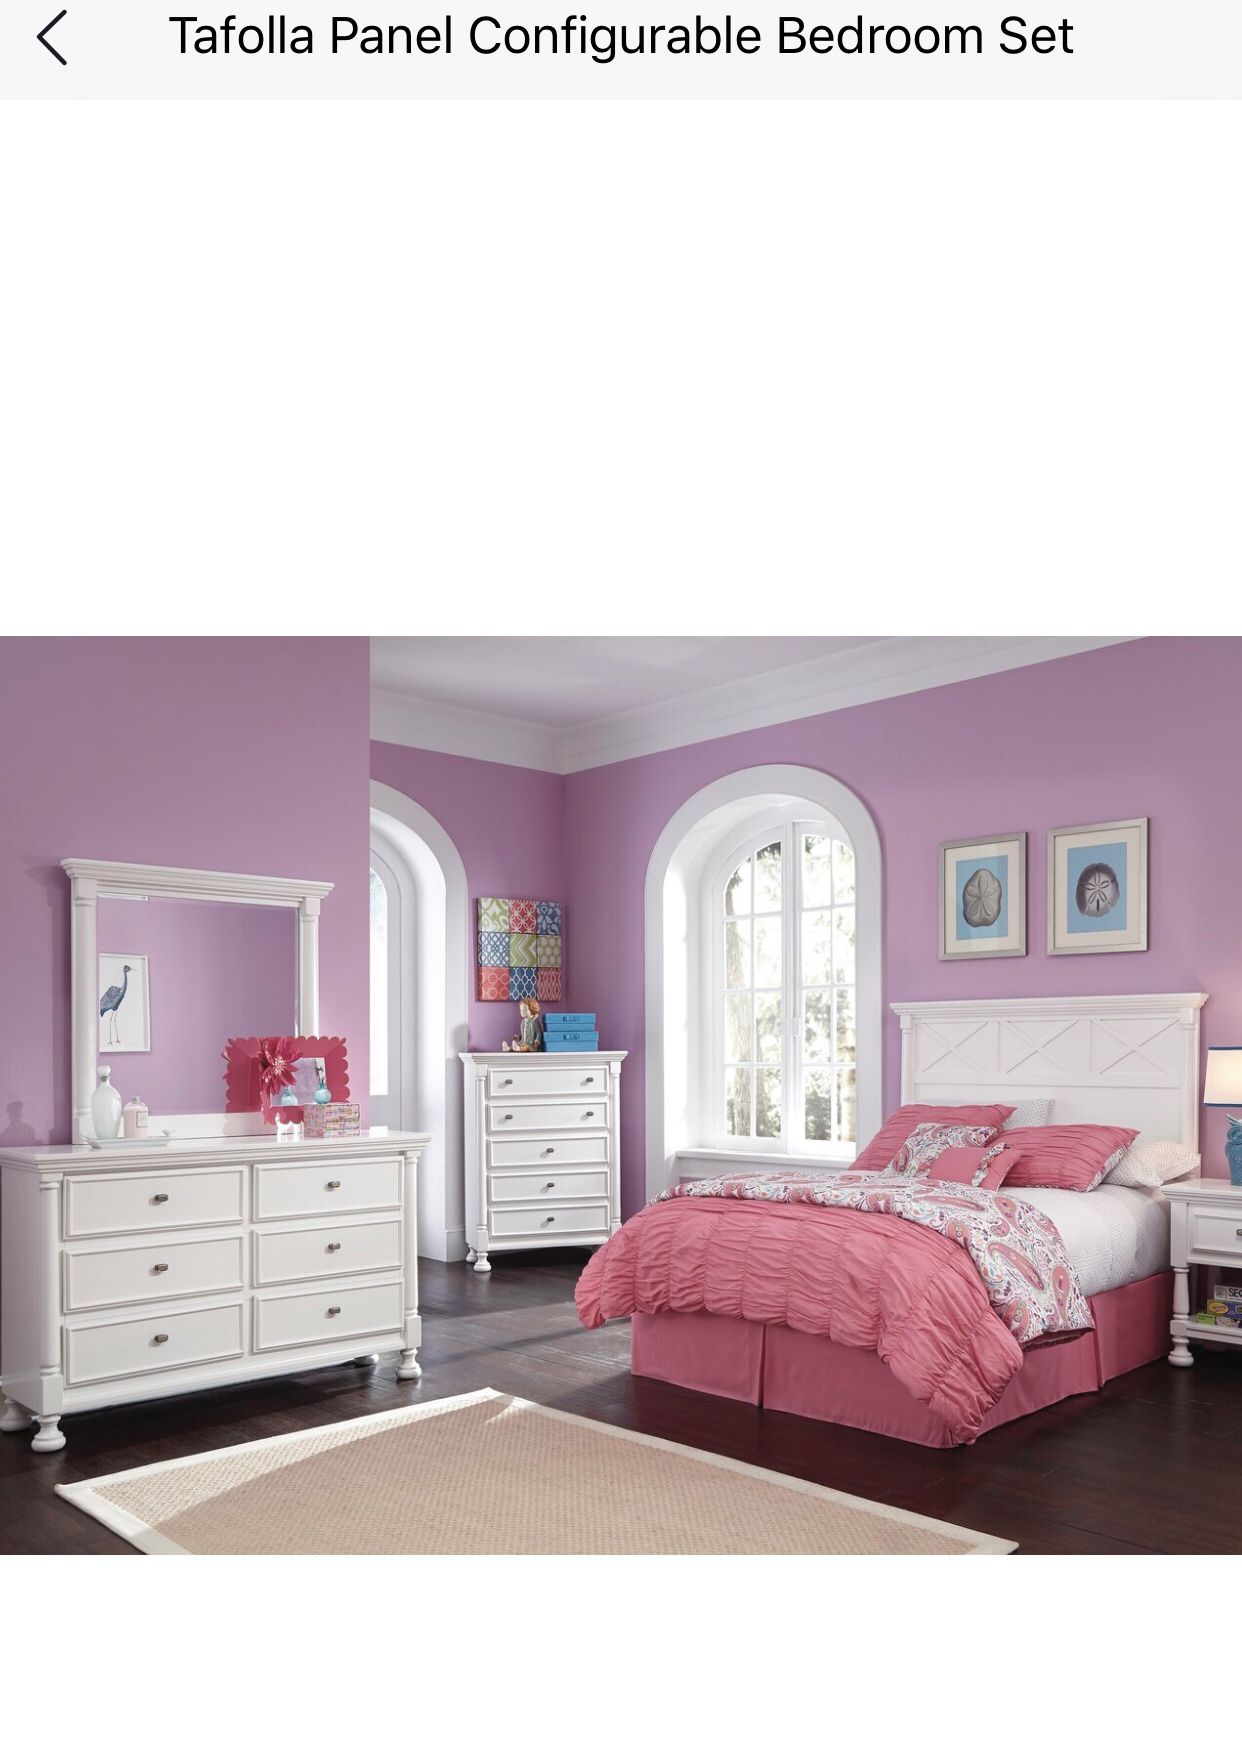 Twin size bedroom set with 55in Samsung smart tv